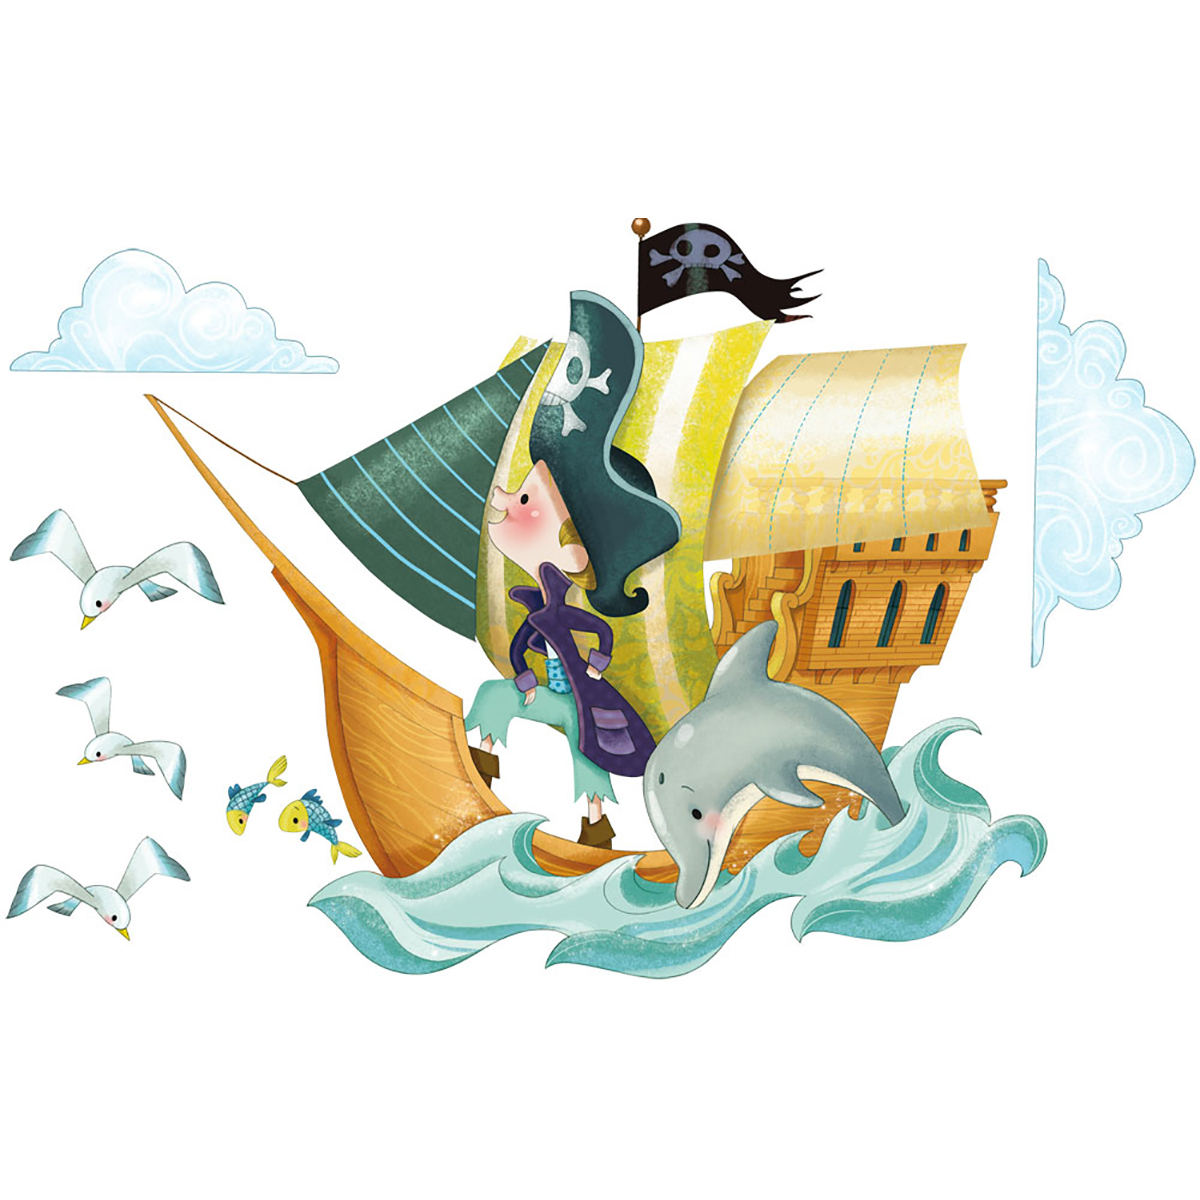 Pirate ship wall sticker for kids- Acte deco